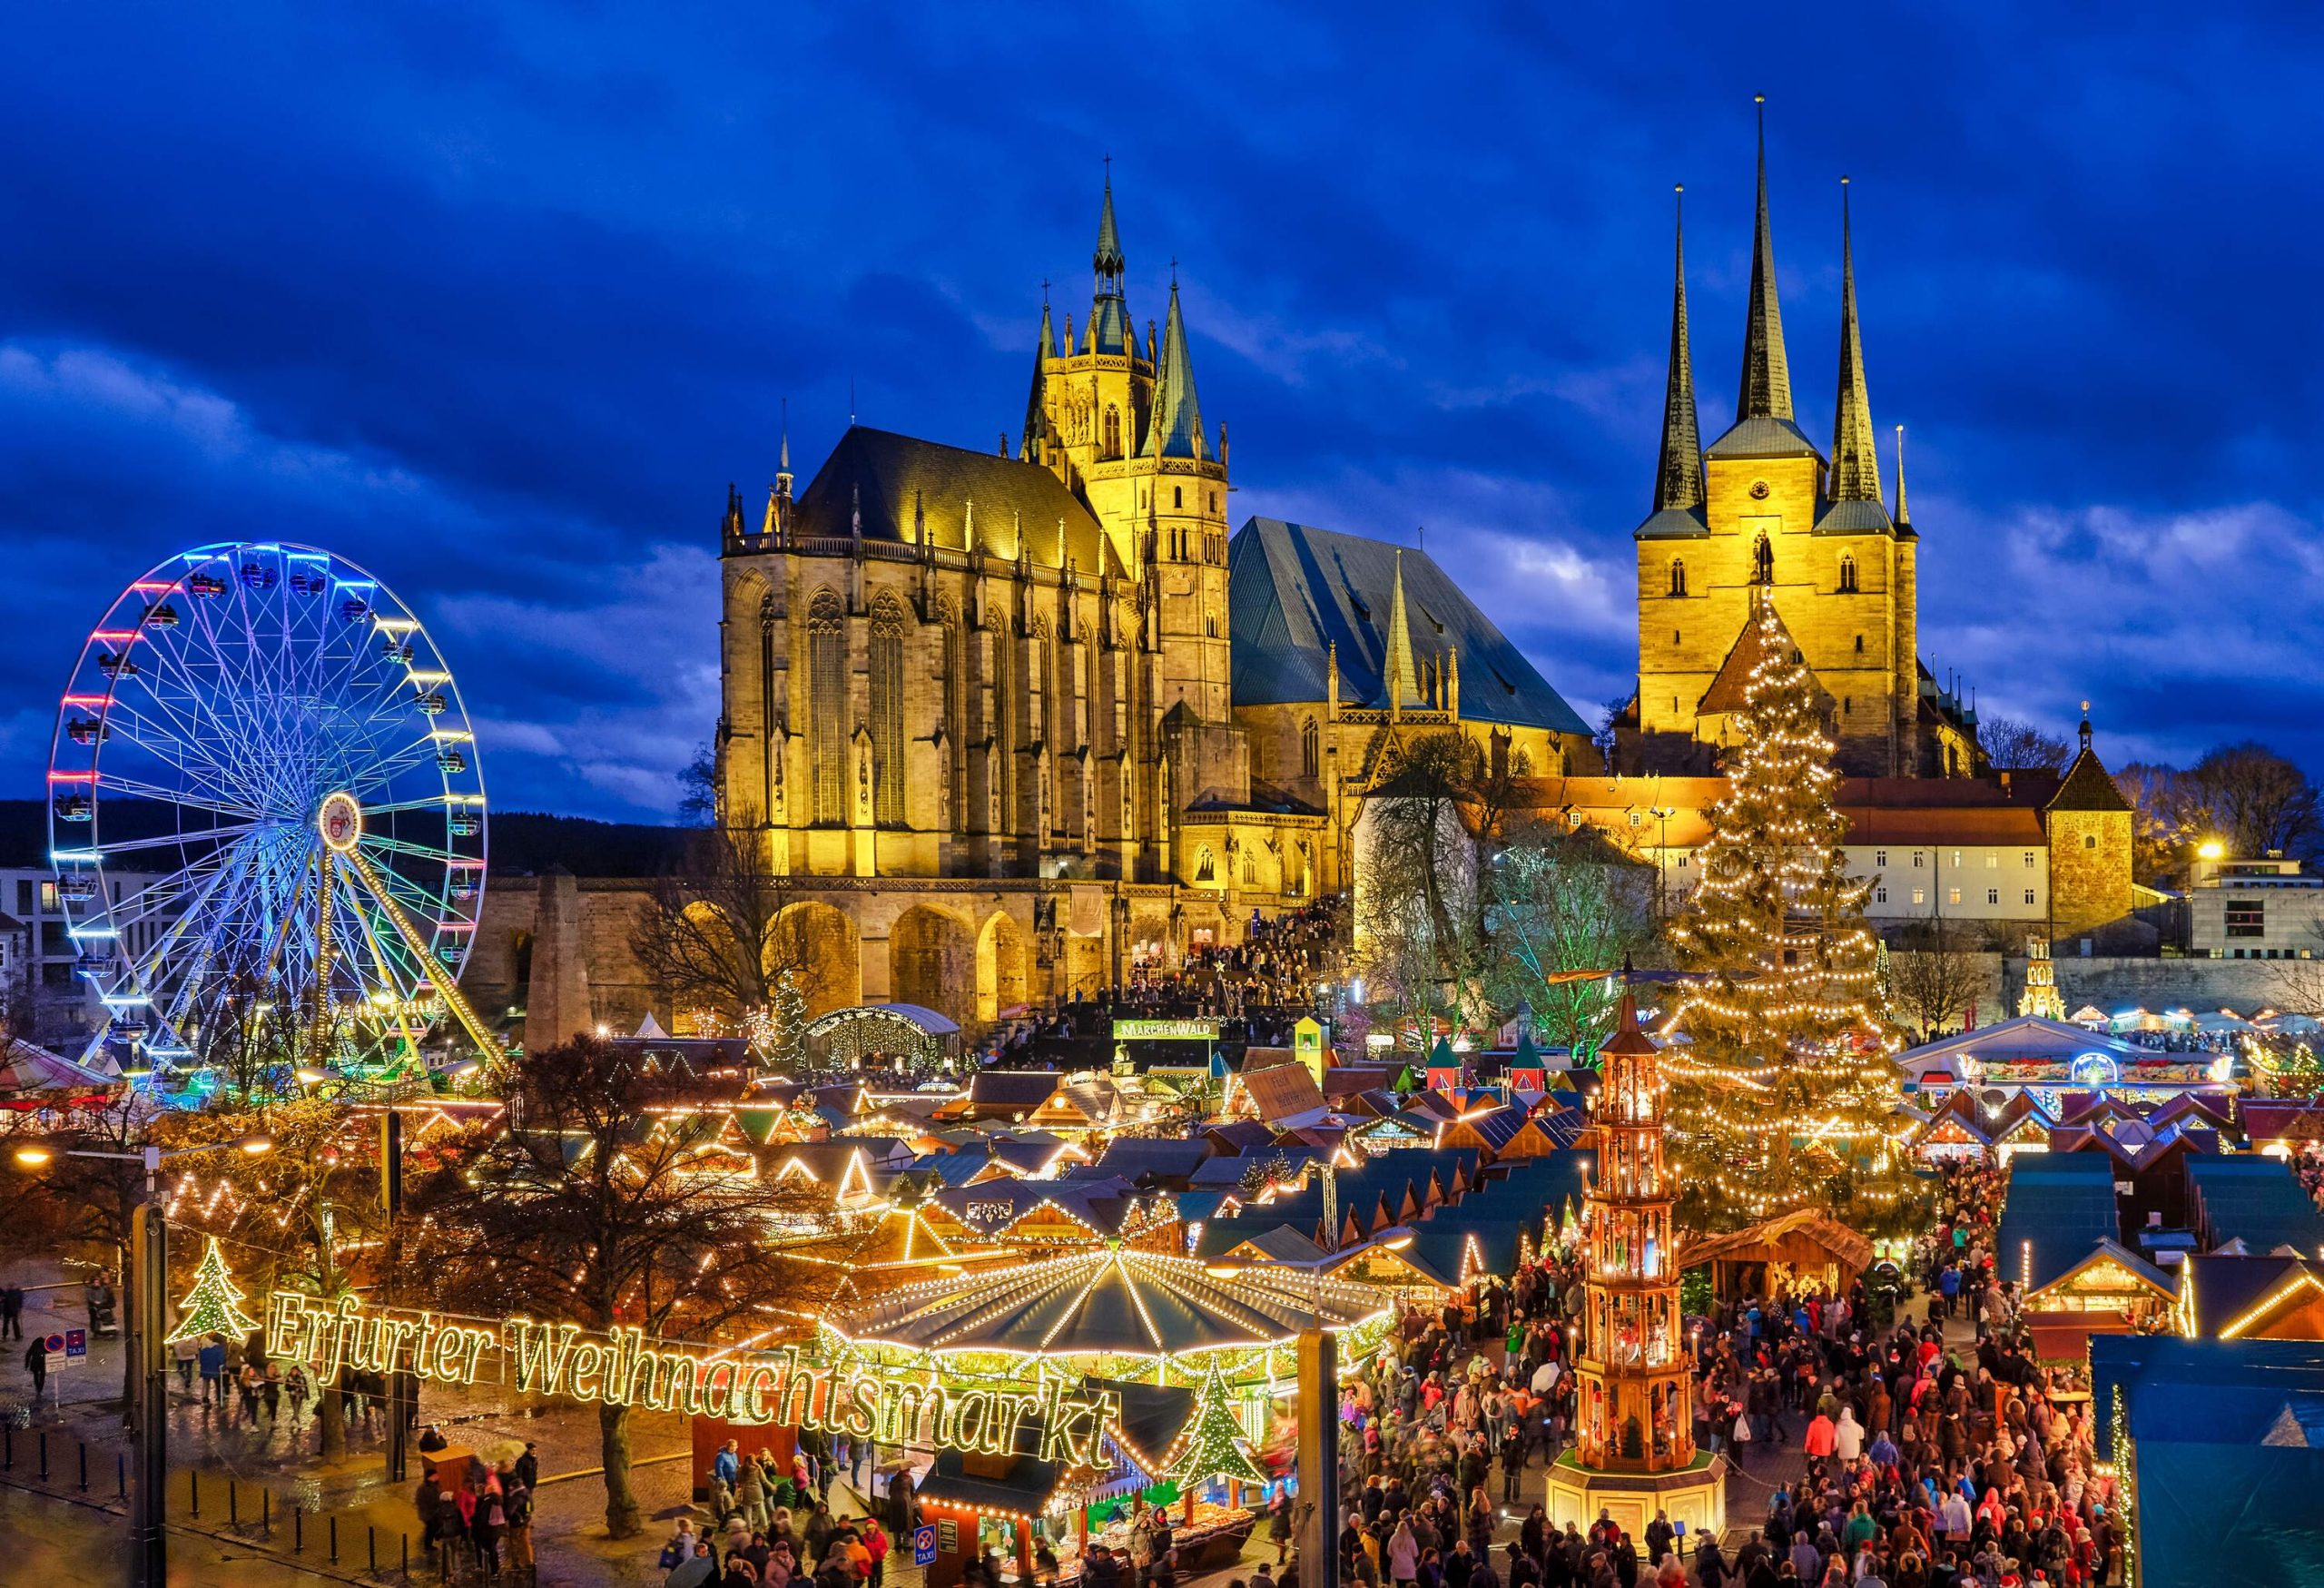 A lively Christmas market heavily decorated with holiday lights with marvellous Gothic structures in the background.